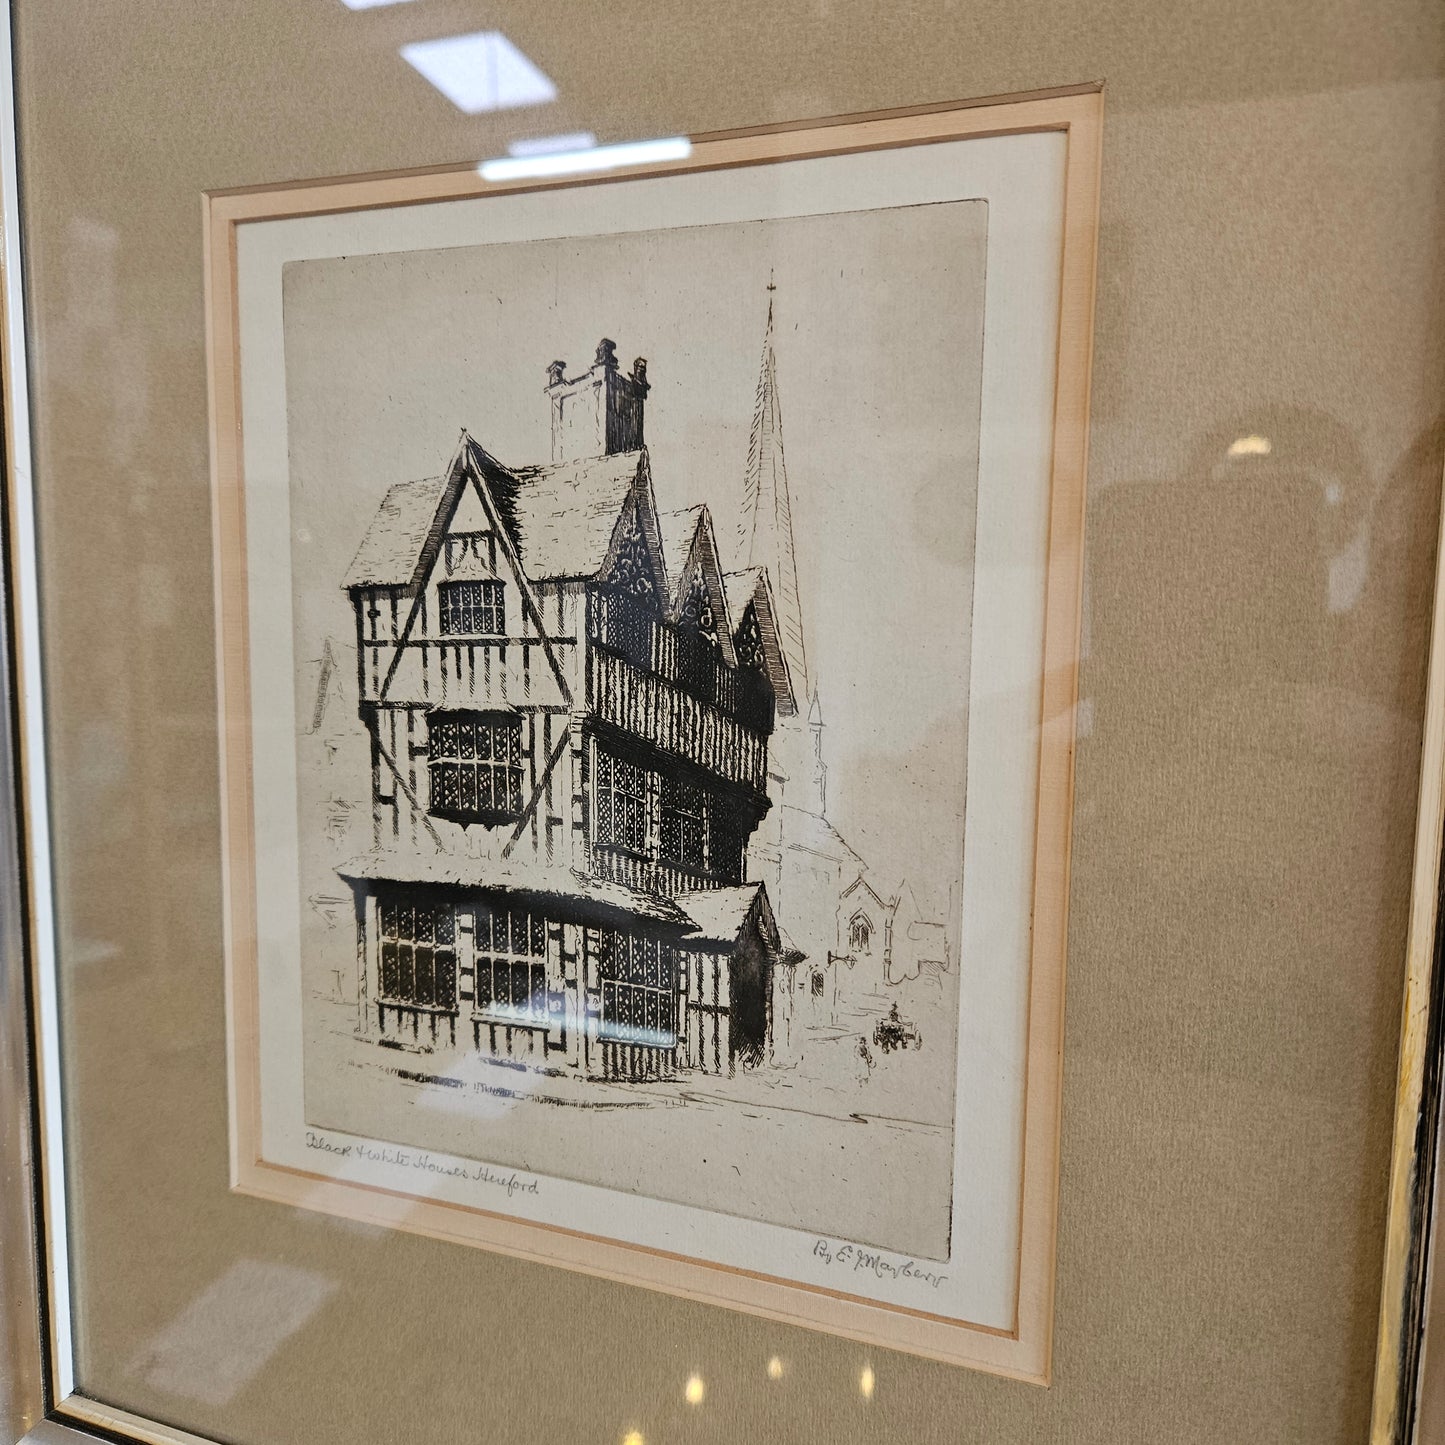 Framed Etching "Black and White Houses Hereford" by E Mayberry